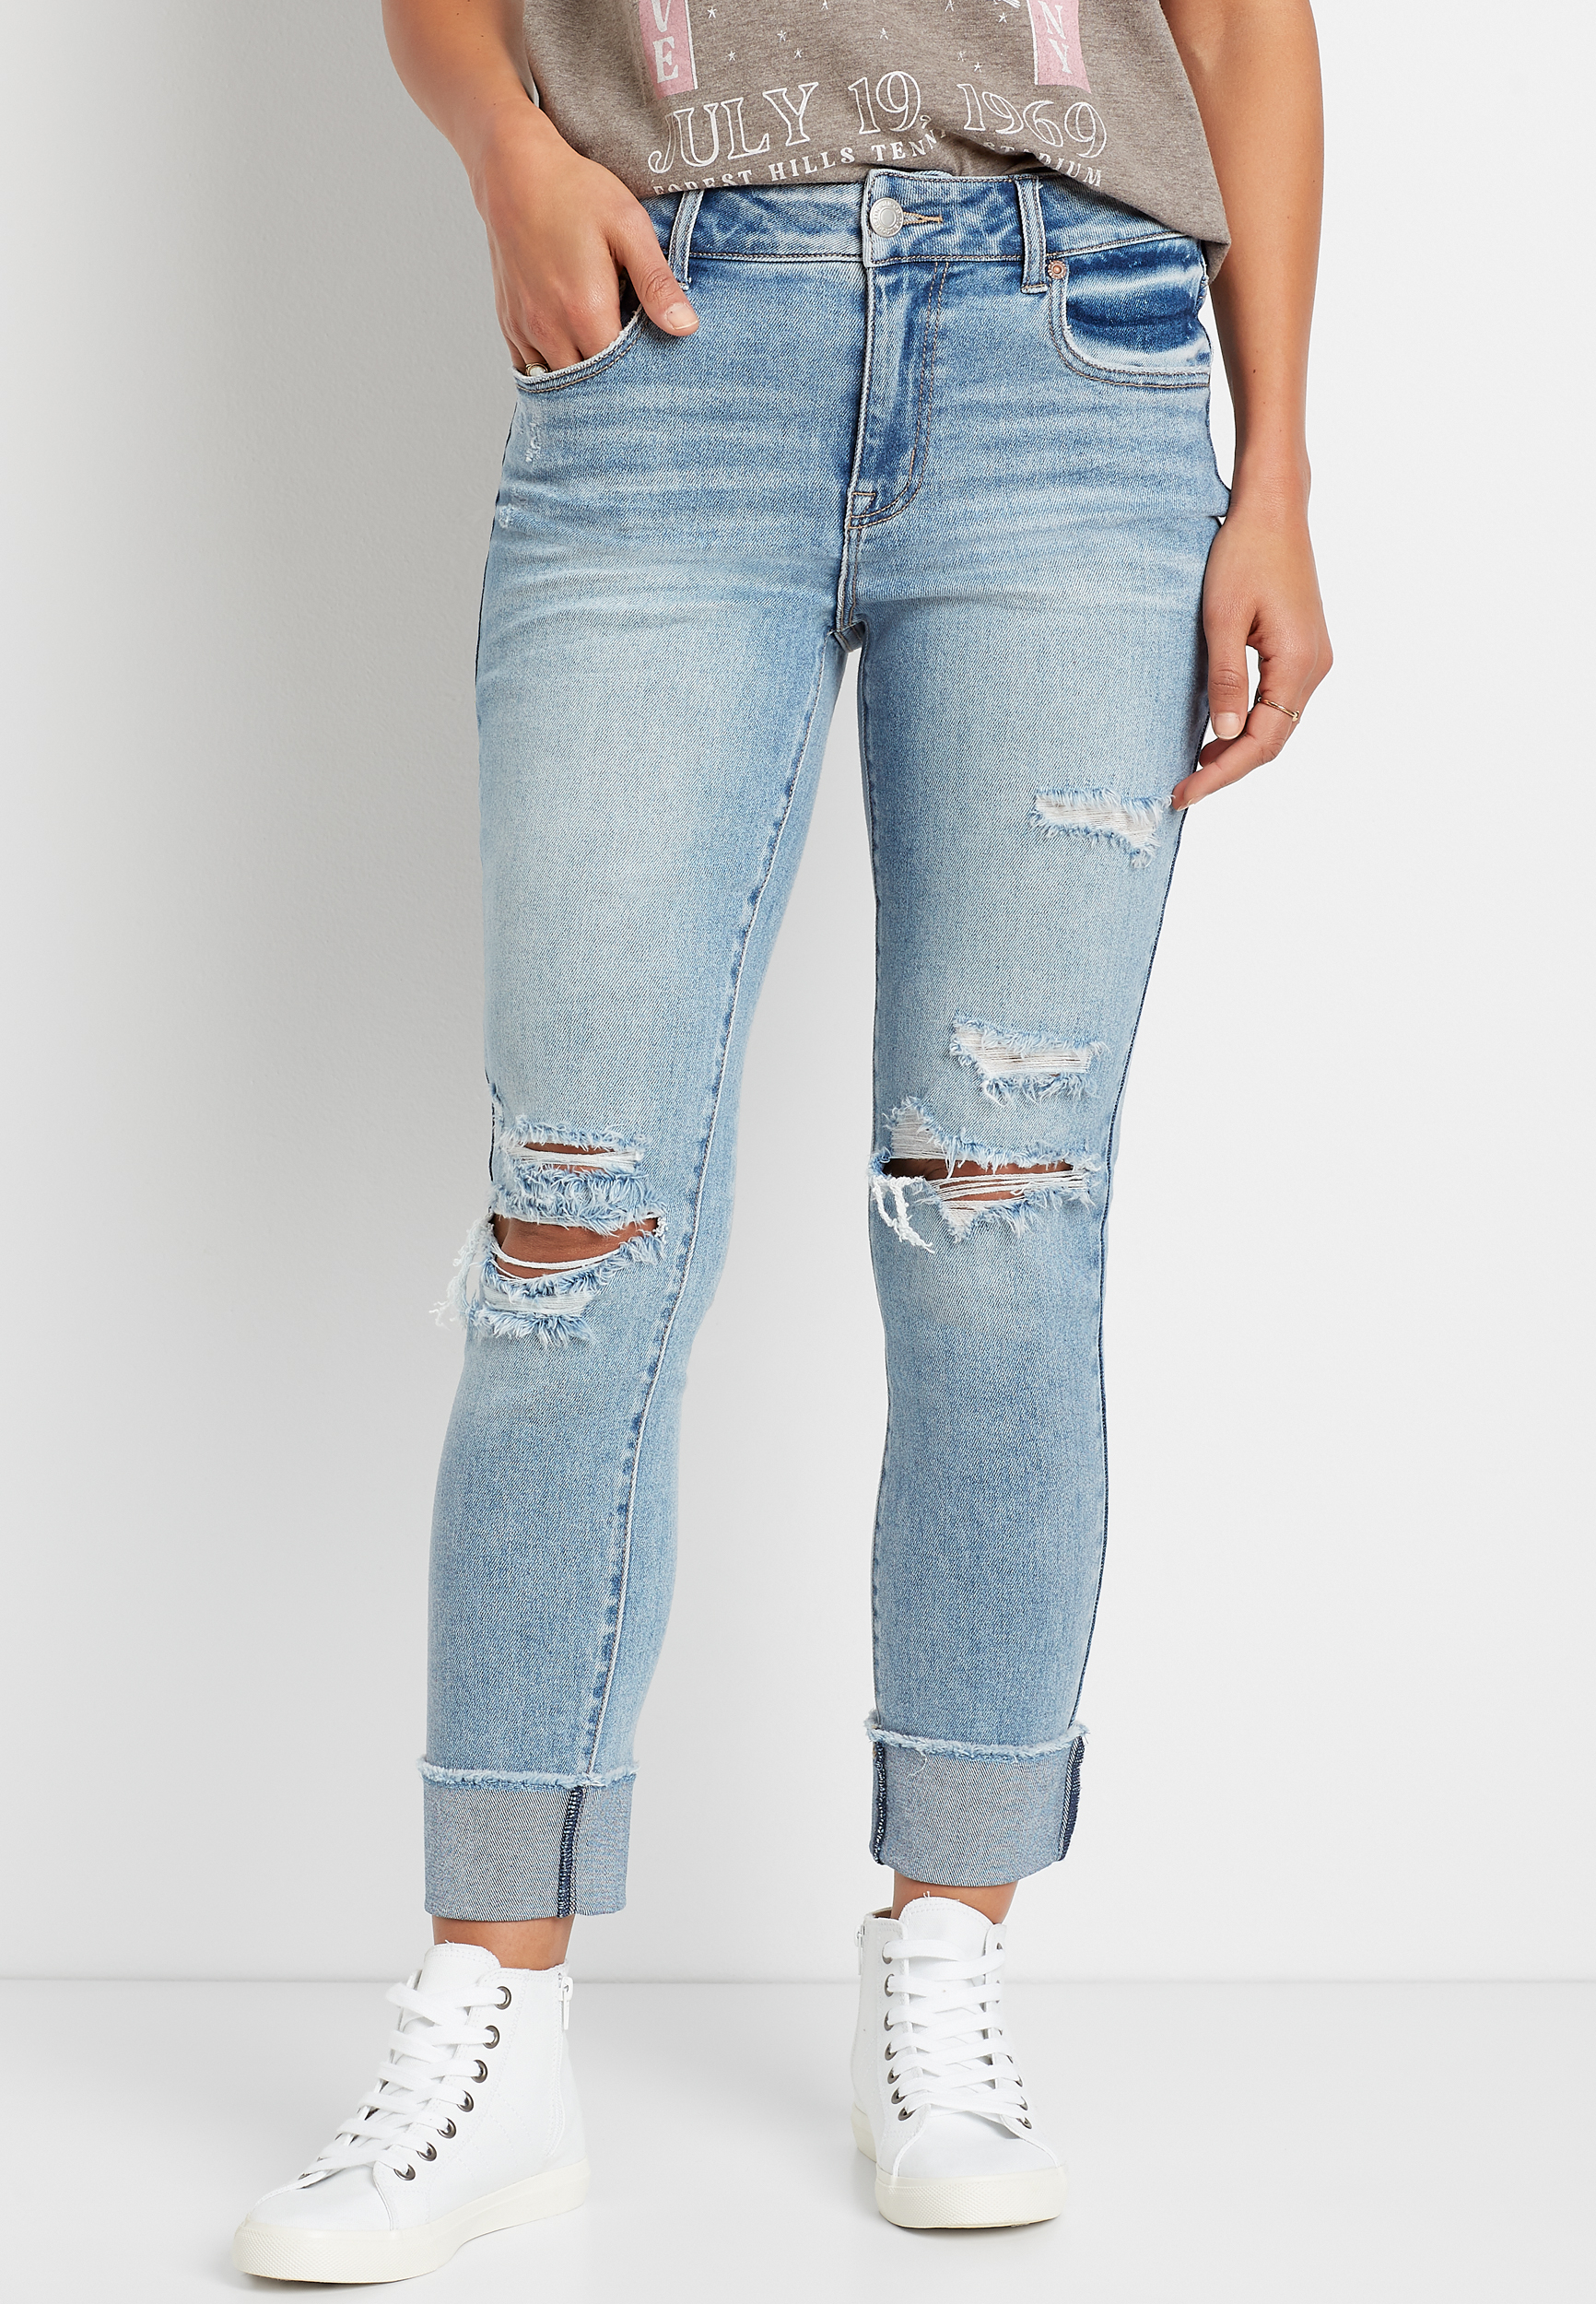 m jeans by maurices™ Vintage Slim Straight High Rise Ripped Jean | maurices